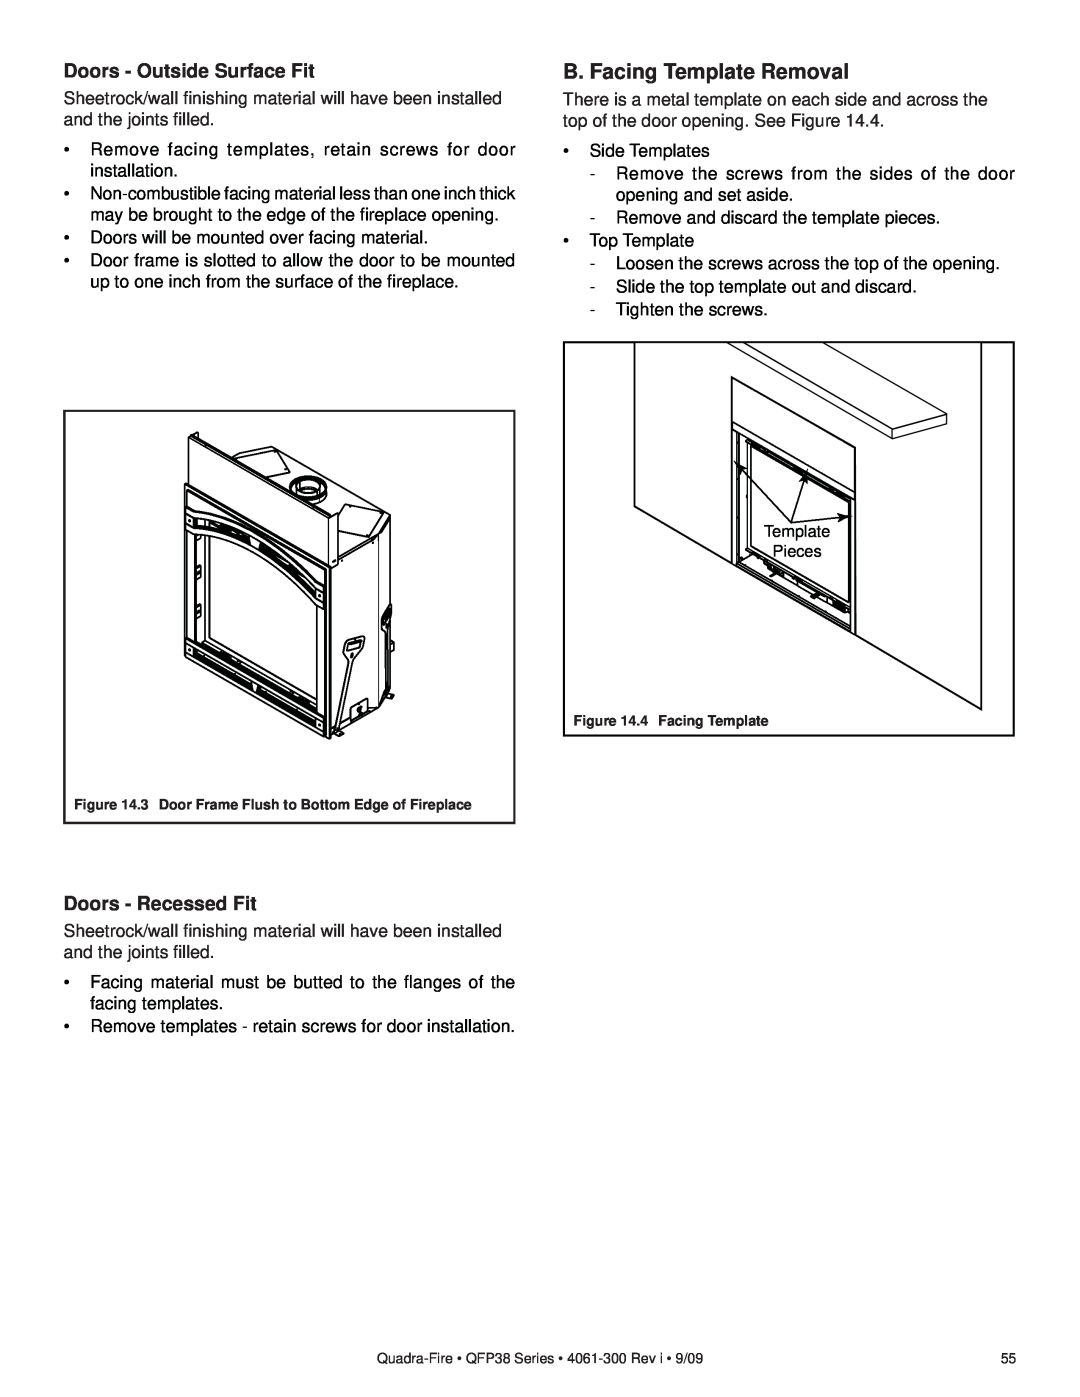 Quadra-Fire QFP38-LP, QFP38-NG owner manual B. Facing Template Removal, Doors - Outside Surface Fit, Doors - Recessed Fit 